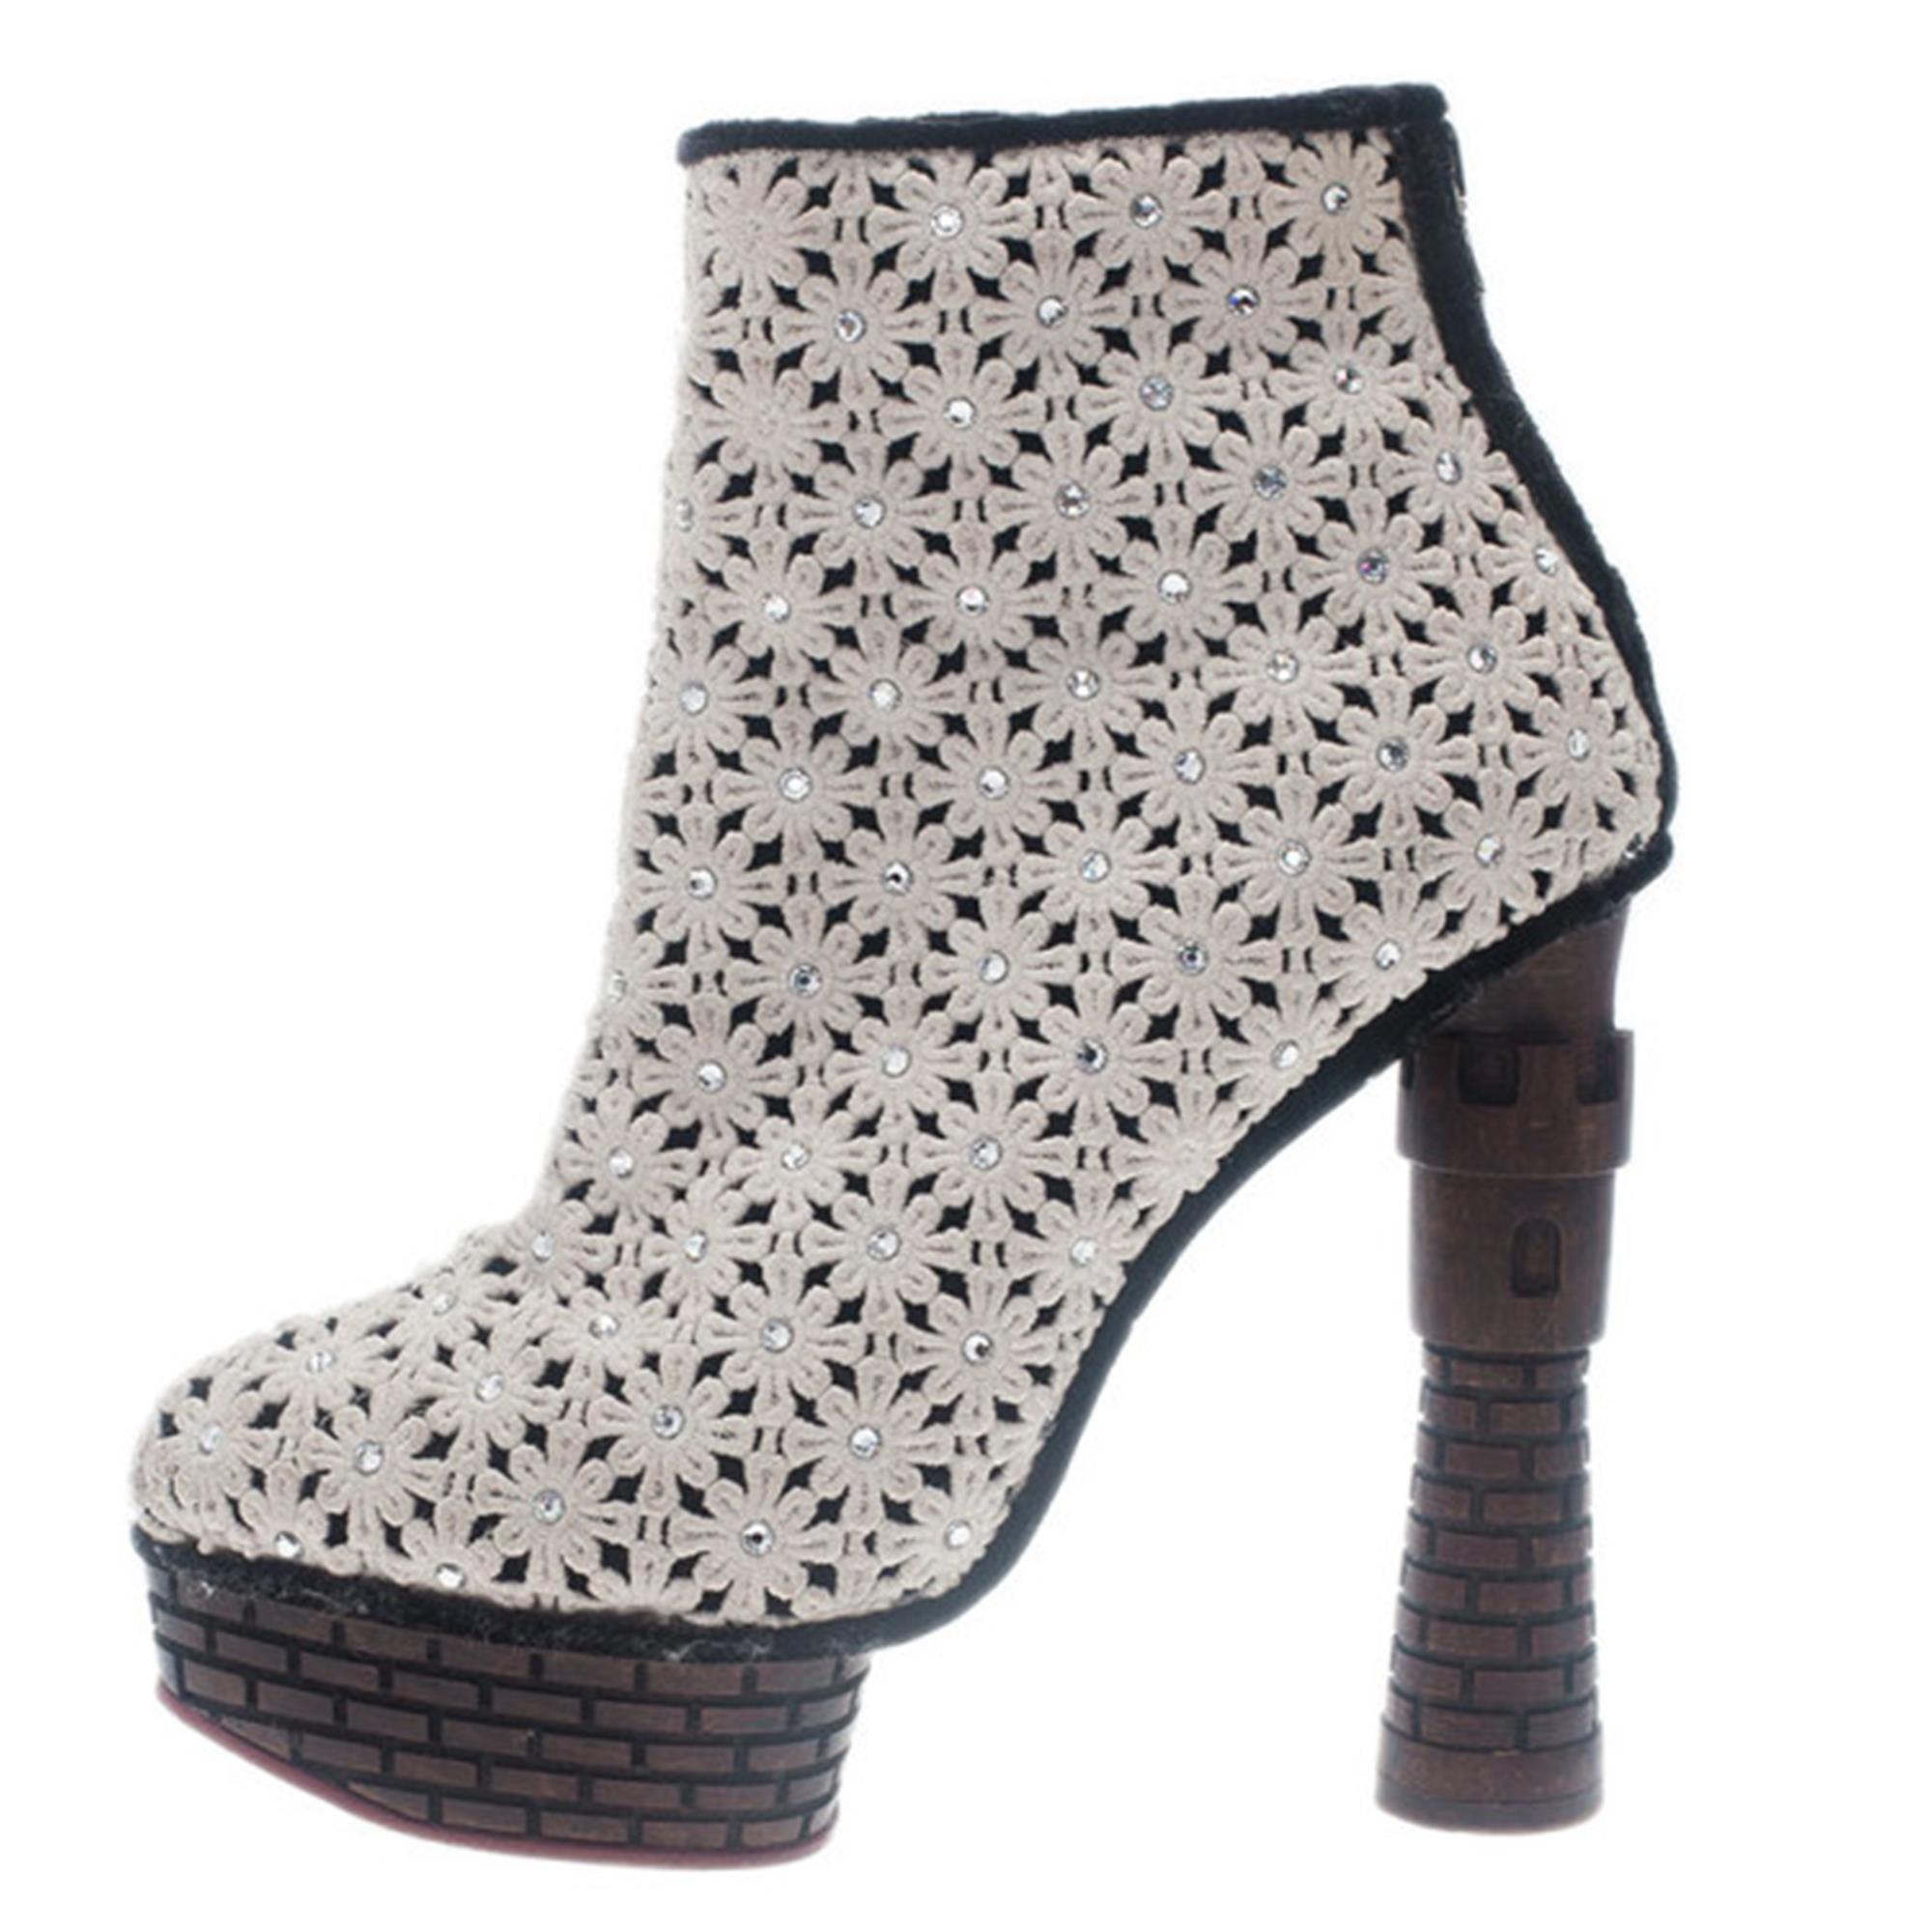 Women's Charlotte Olympia Cream Damsel In Distress Crocheted Ankle Boots Size 36.5